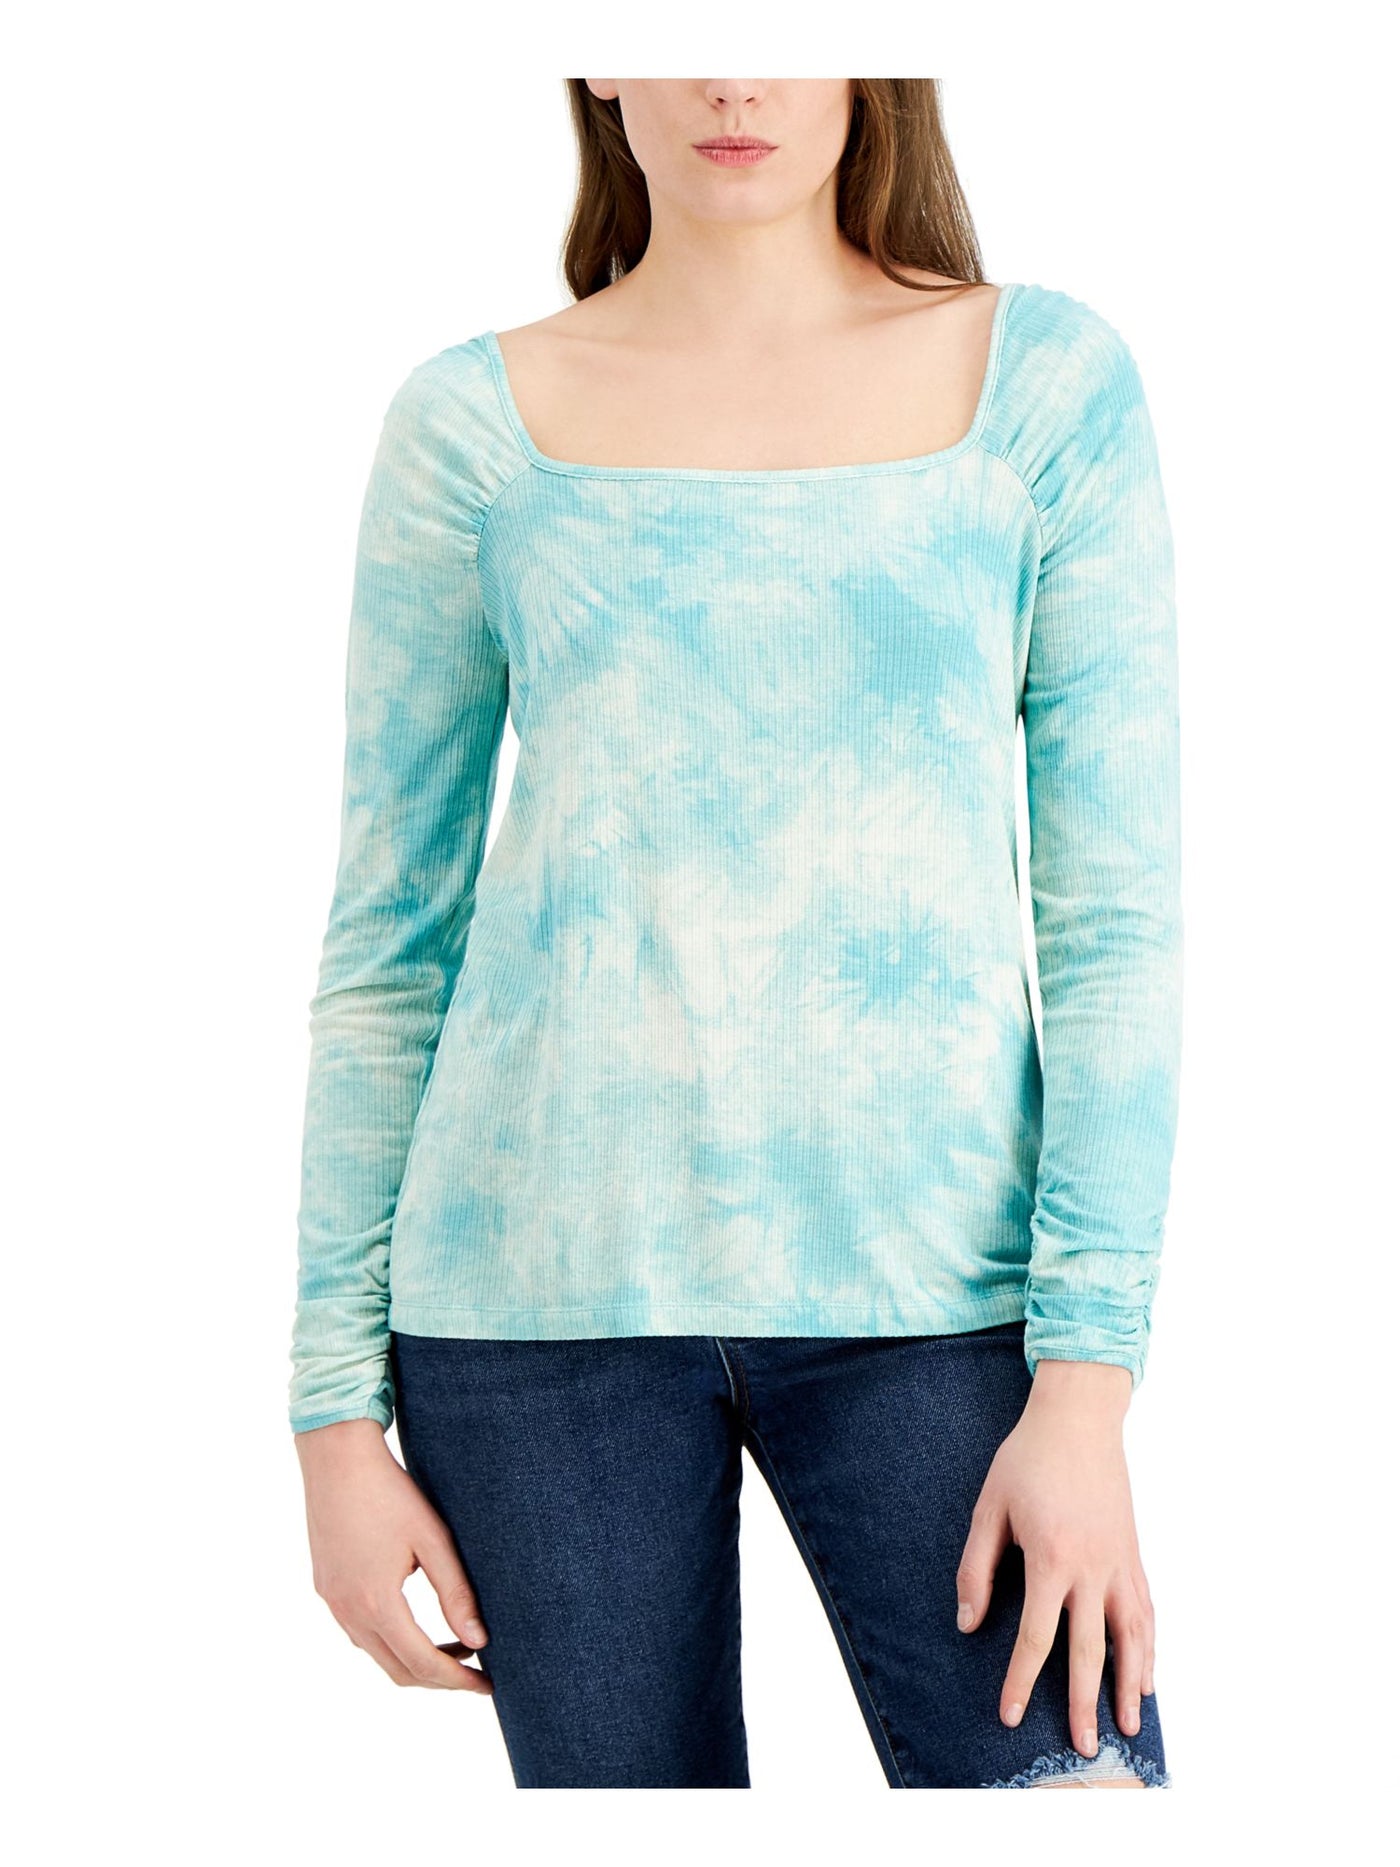 FEVER Womens Long Sleeve Square Neck Top